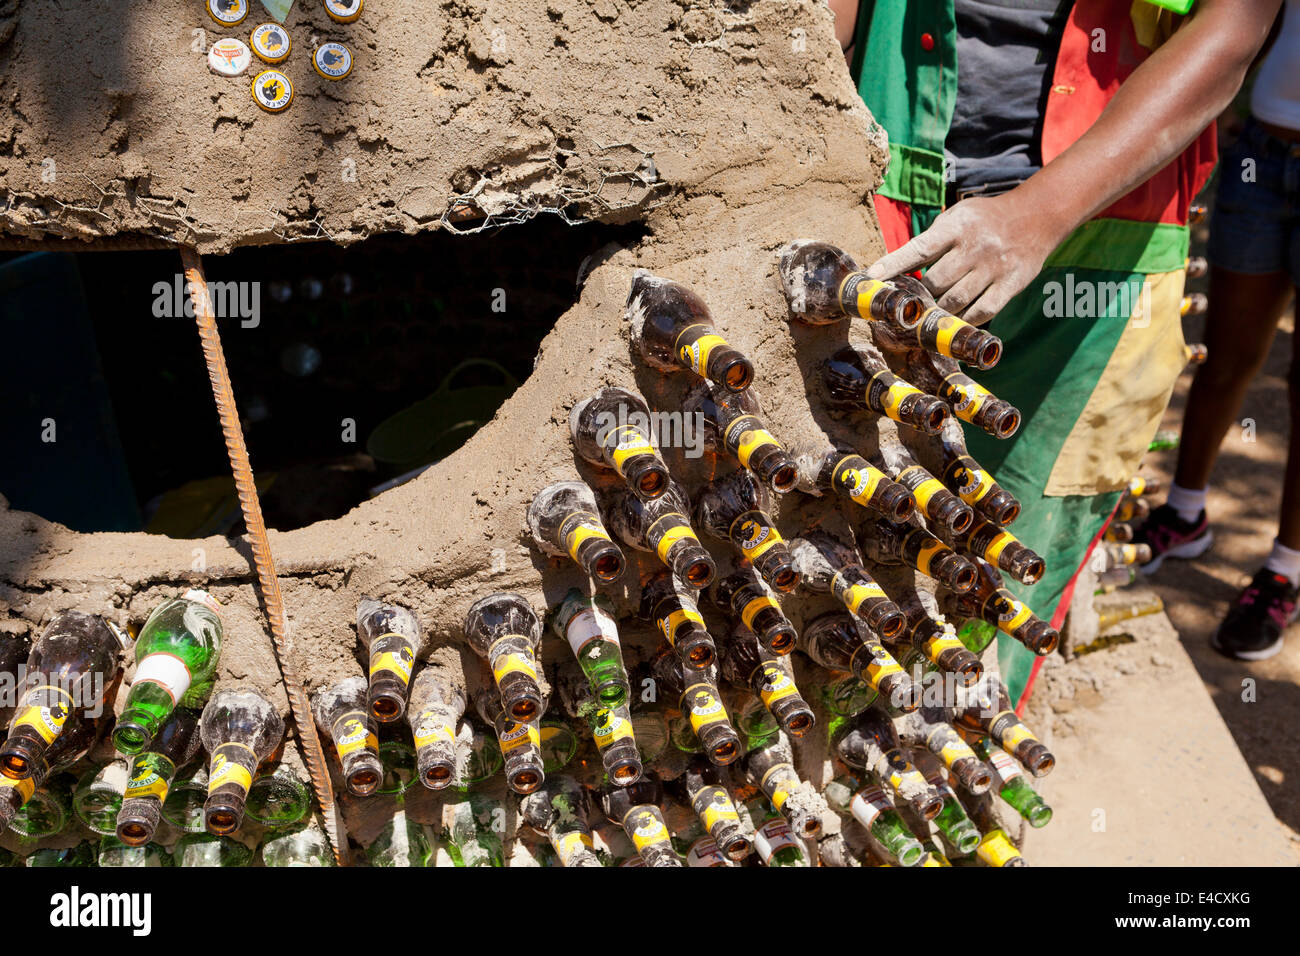 Kenyan man building a mud hut using glass bottles and other recycled materials Stock Photo